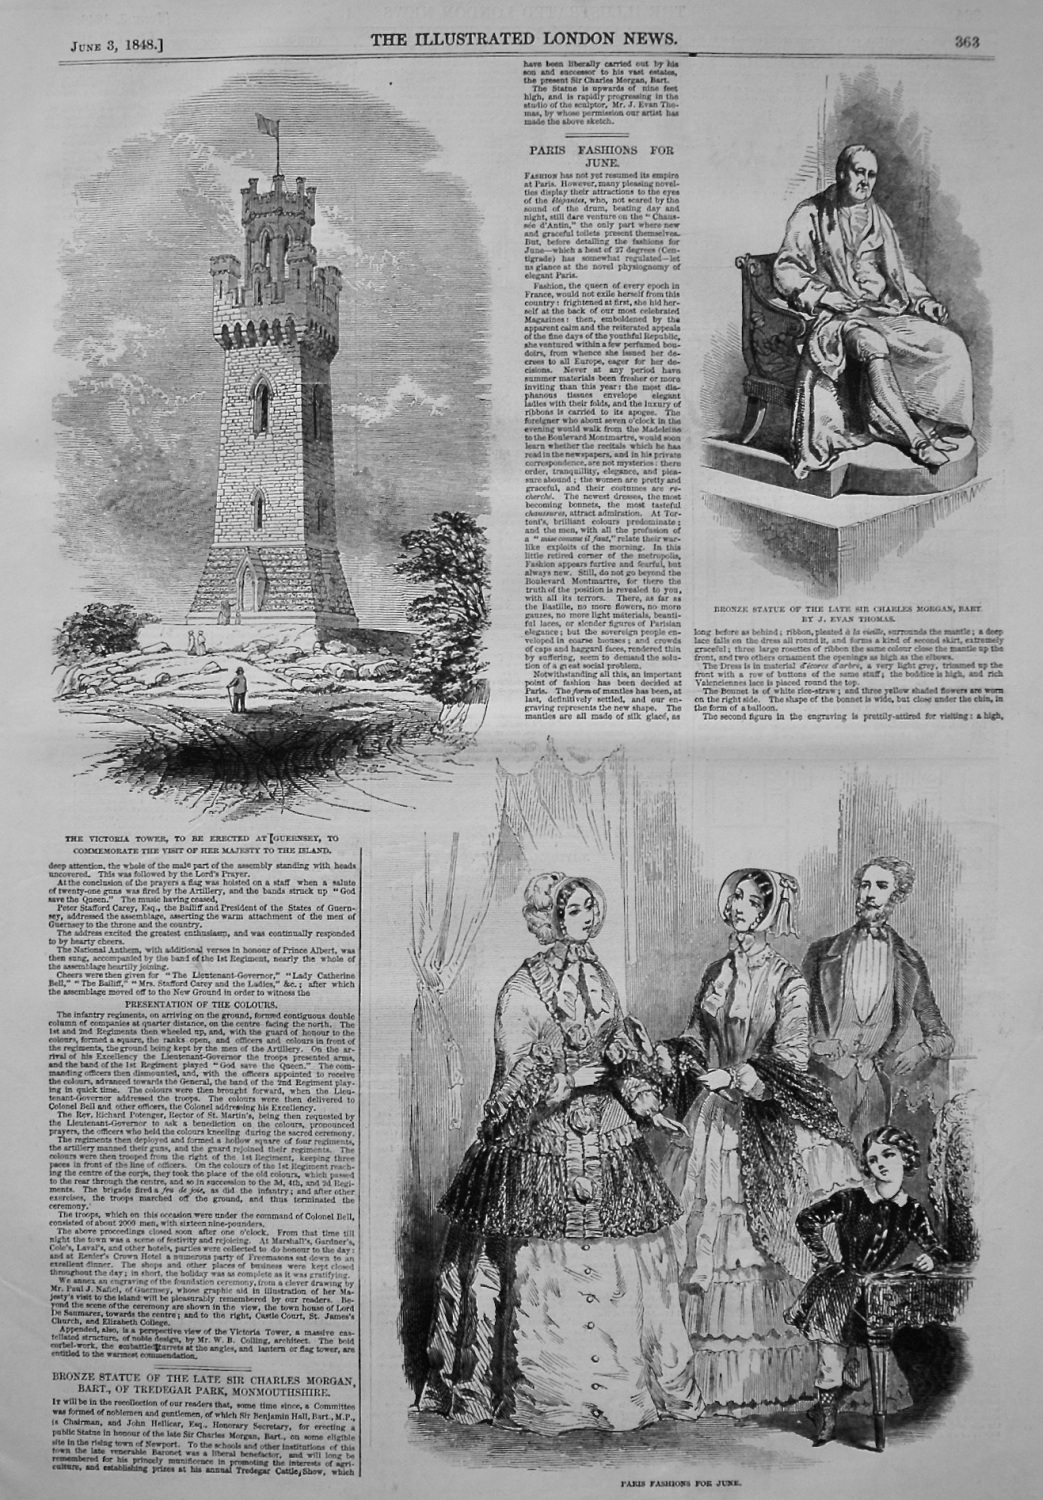 The Victoria Tower, to be erected at Guernsey, to Commemorate the visit of 